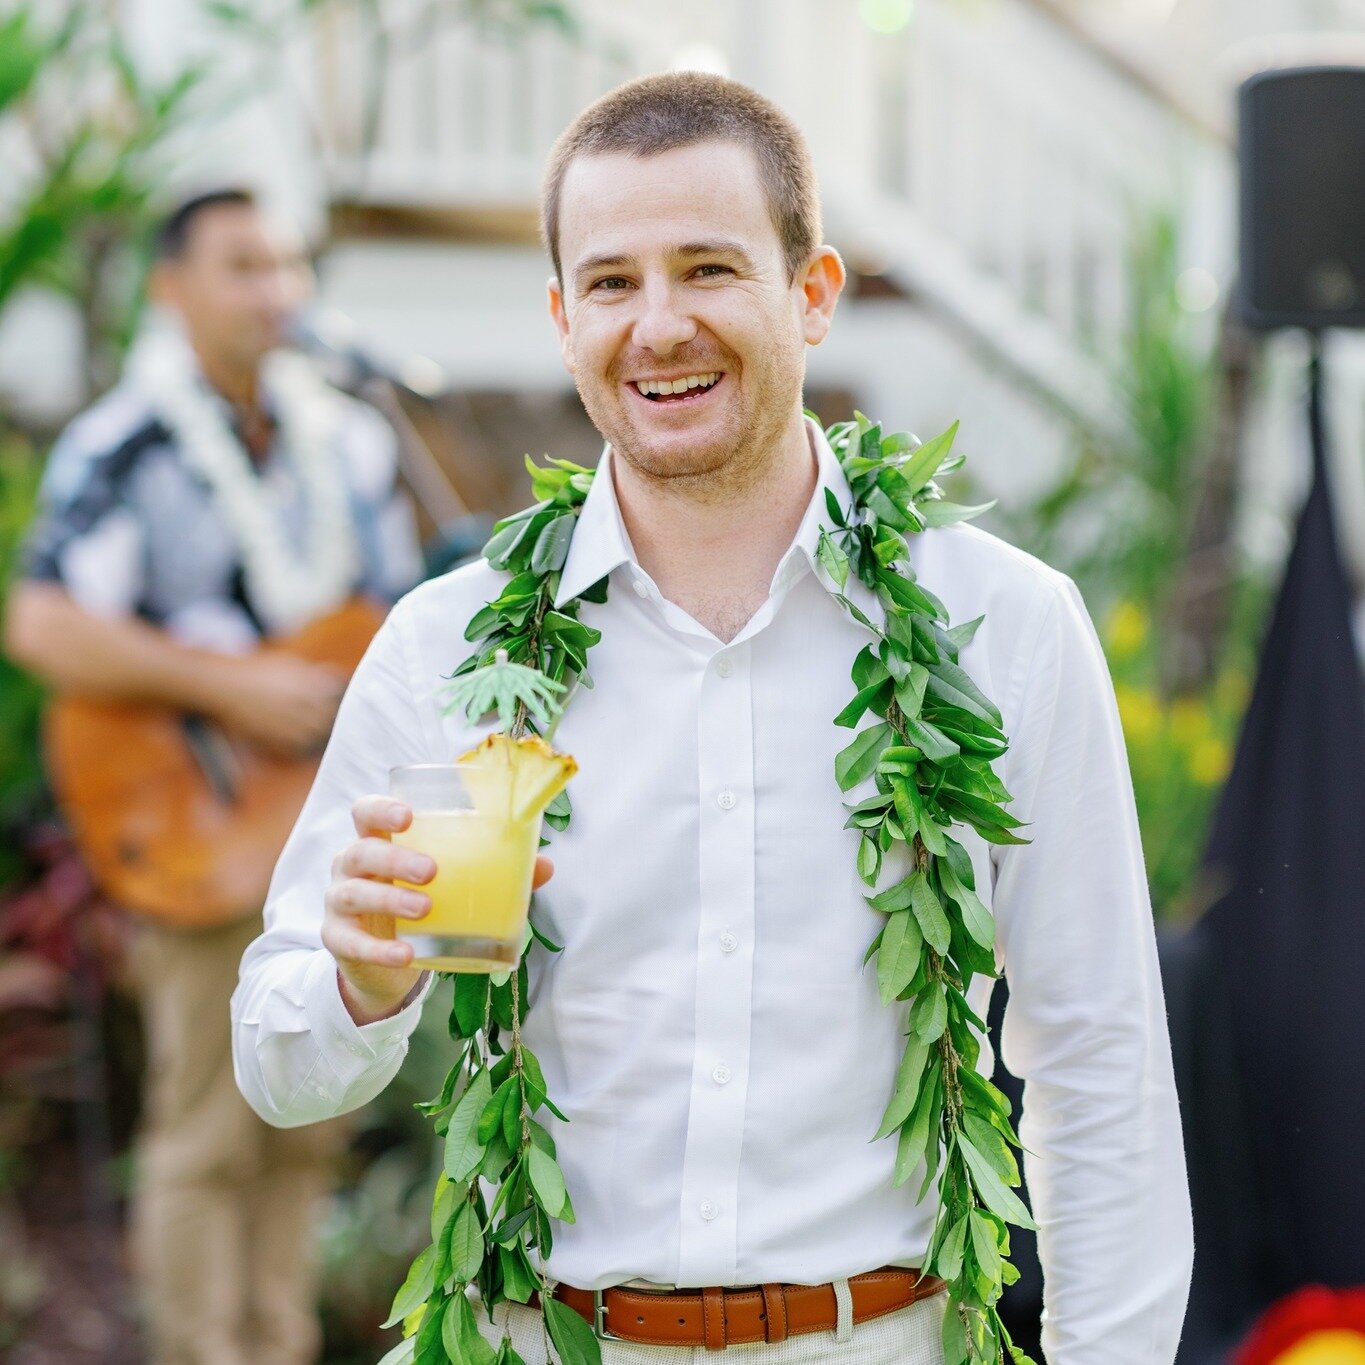 Stepping into marriage with a taste of the tropics. 🌴🍹 The groom's got his cocktail in hand, ready to kick off the celebration in style. Here's to cool vibes and unforgettable memories! 

Venue @maleanagardenskailua 
HMU @revealhairandmakeup 
Cake 